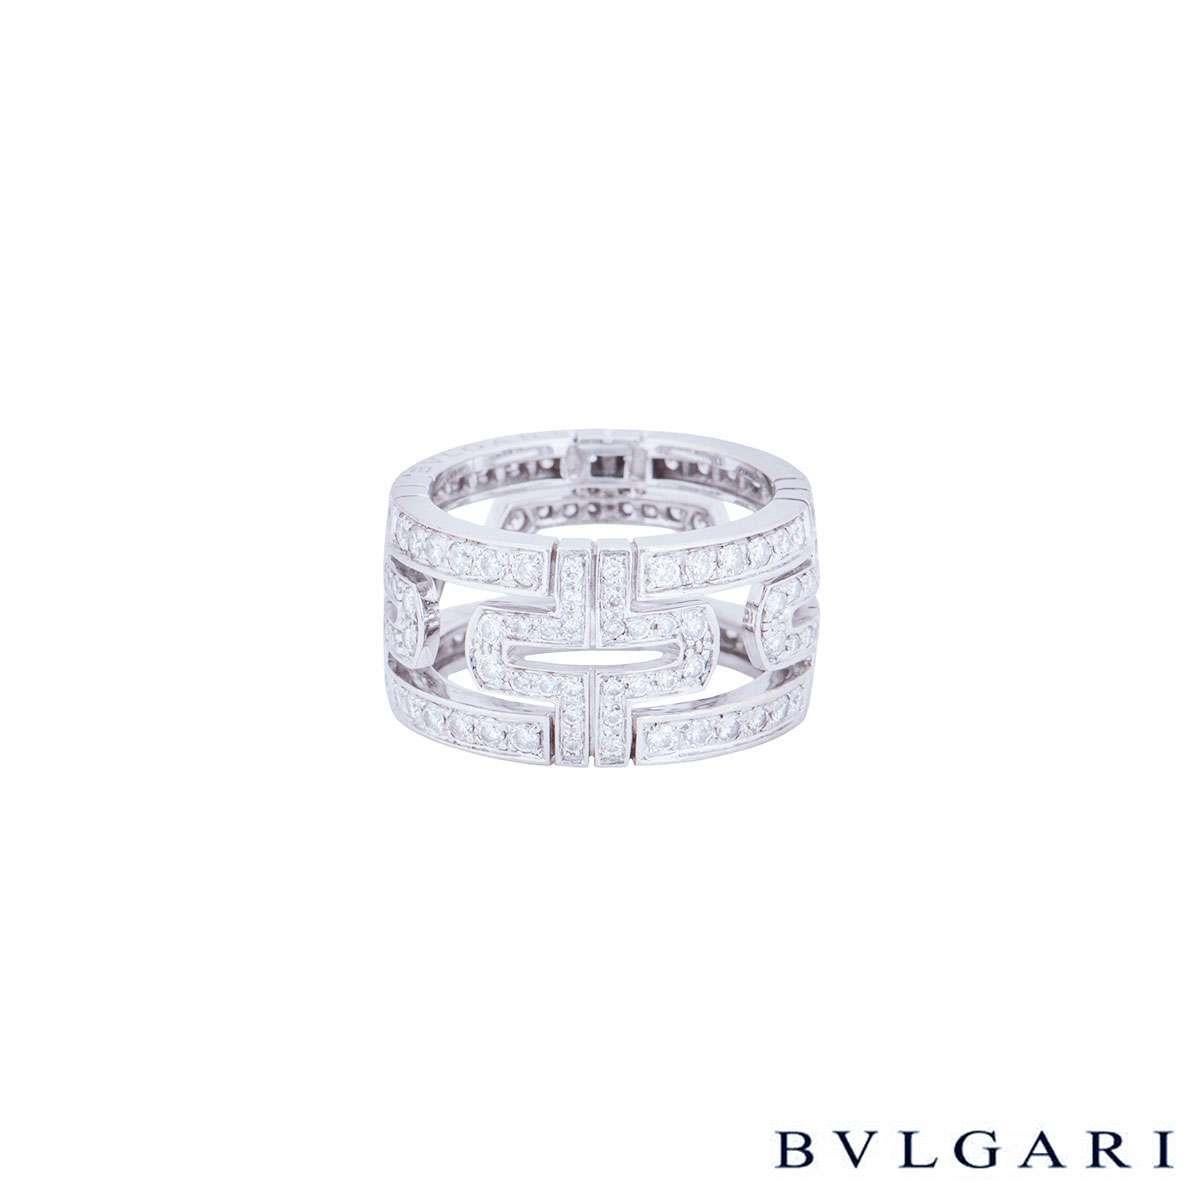 An 18k white gold diamond set Parentesi ring by Bvlgari. The ring features 4 lozenge-shape panels set to the outer edge, each composed of 36 pave set round brilliant cut diamonds, with a total weight of approximately 1.41ct. The ring measures 11mm